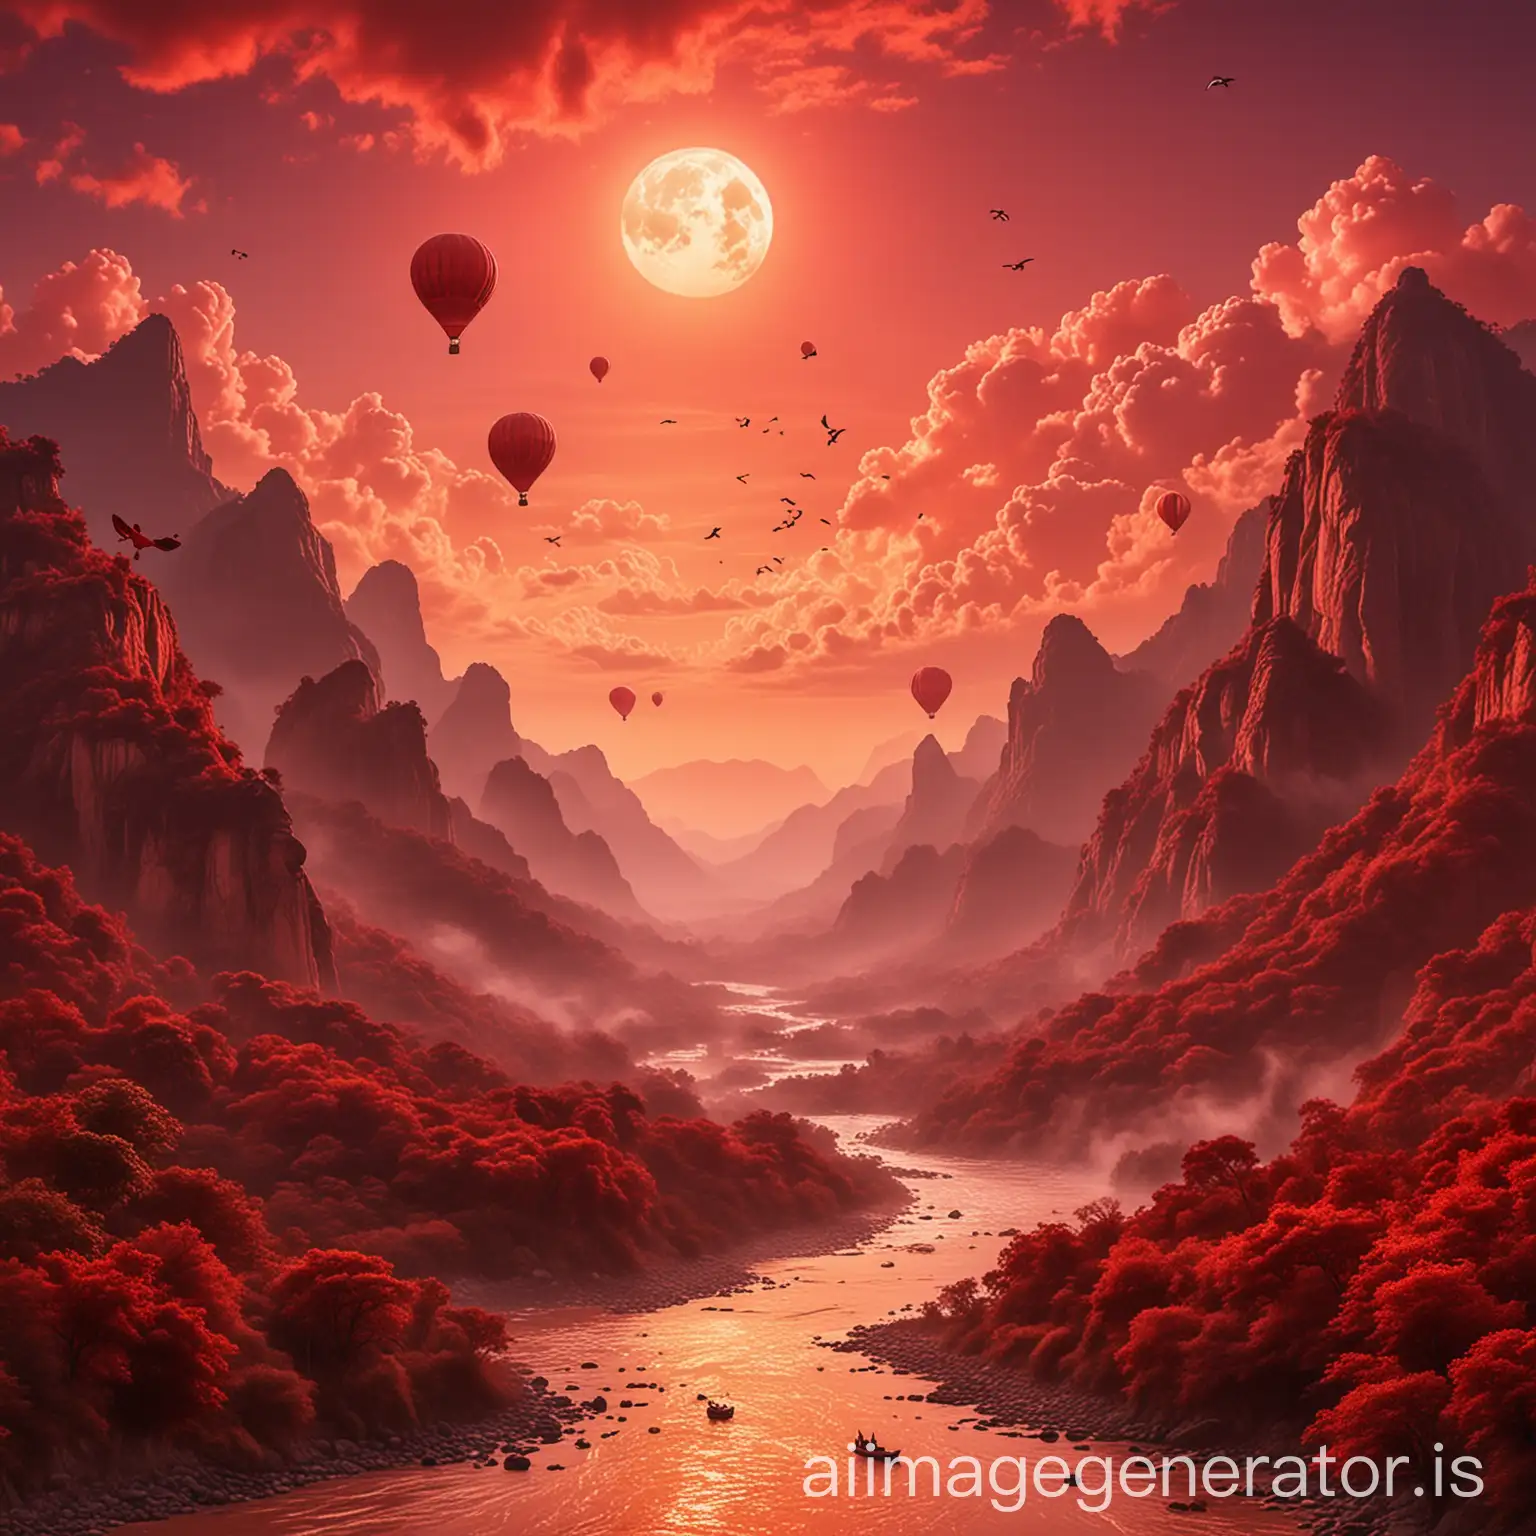 Red cloudy sky with red moon and red mountains with big hot balloons on sky, red jungle with big bajrangbali statue with flowing river, flying birds & Helicopters on the sky.